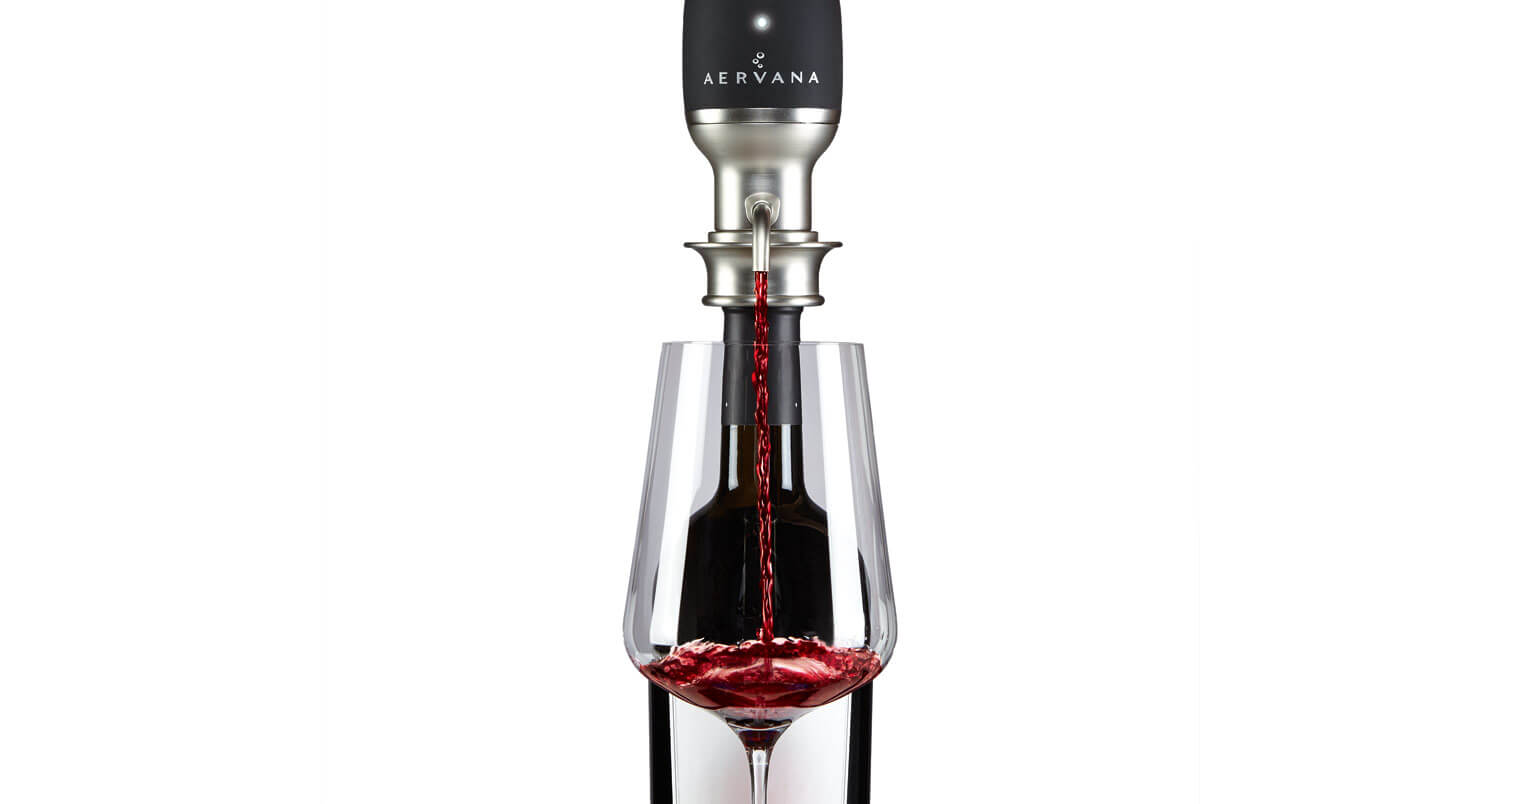 Aervana: The First Electric Push-Button Wine Aerator